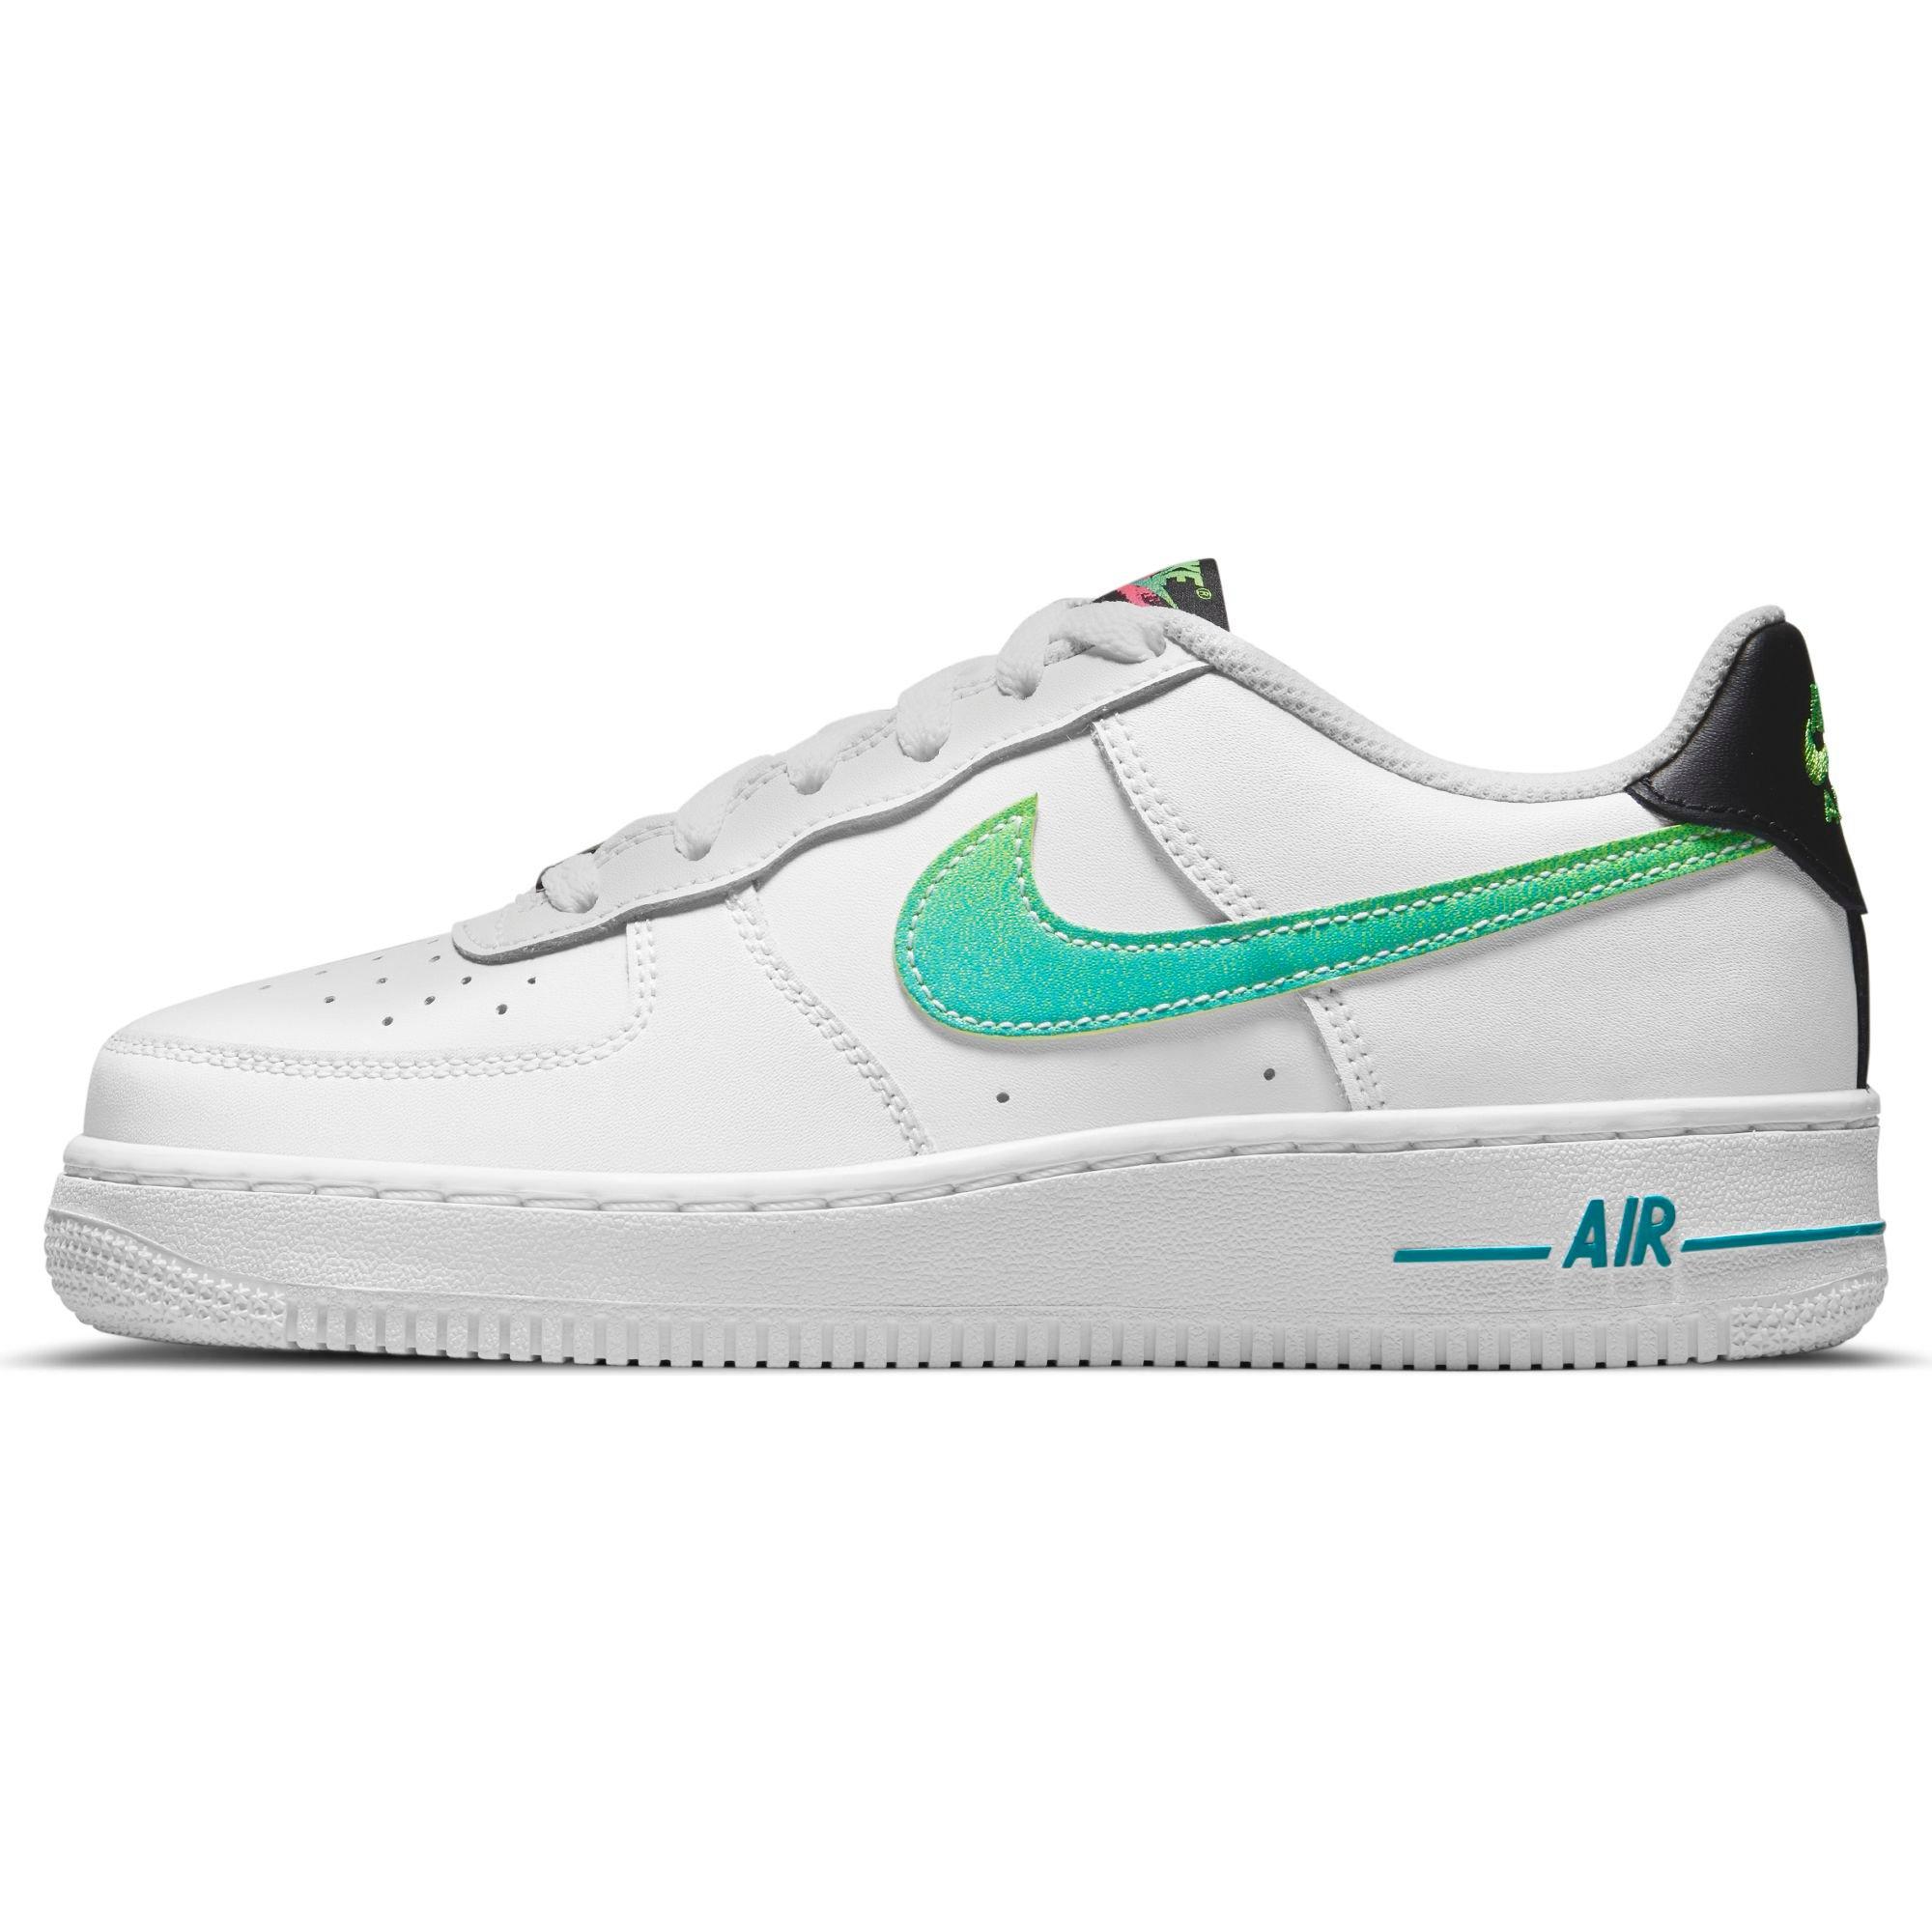 City Gear on X: Neon Nike. Pick up the girls Air Force 1